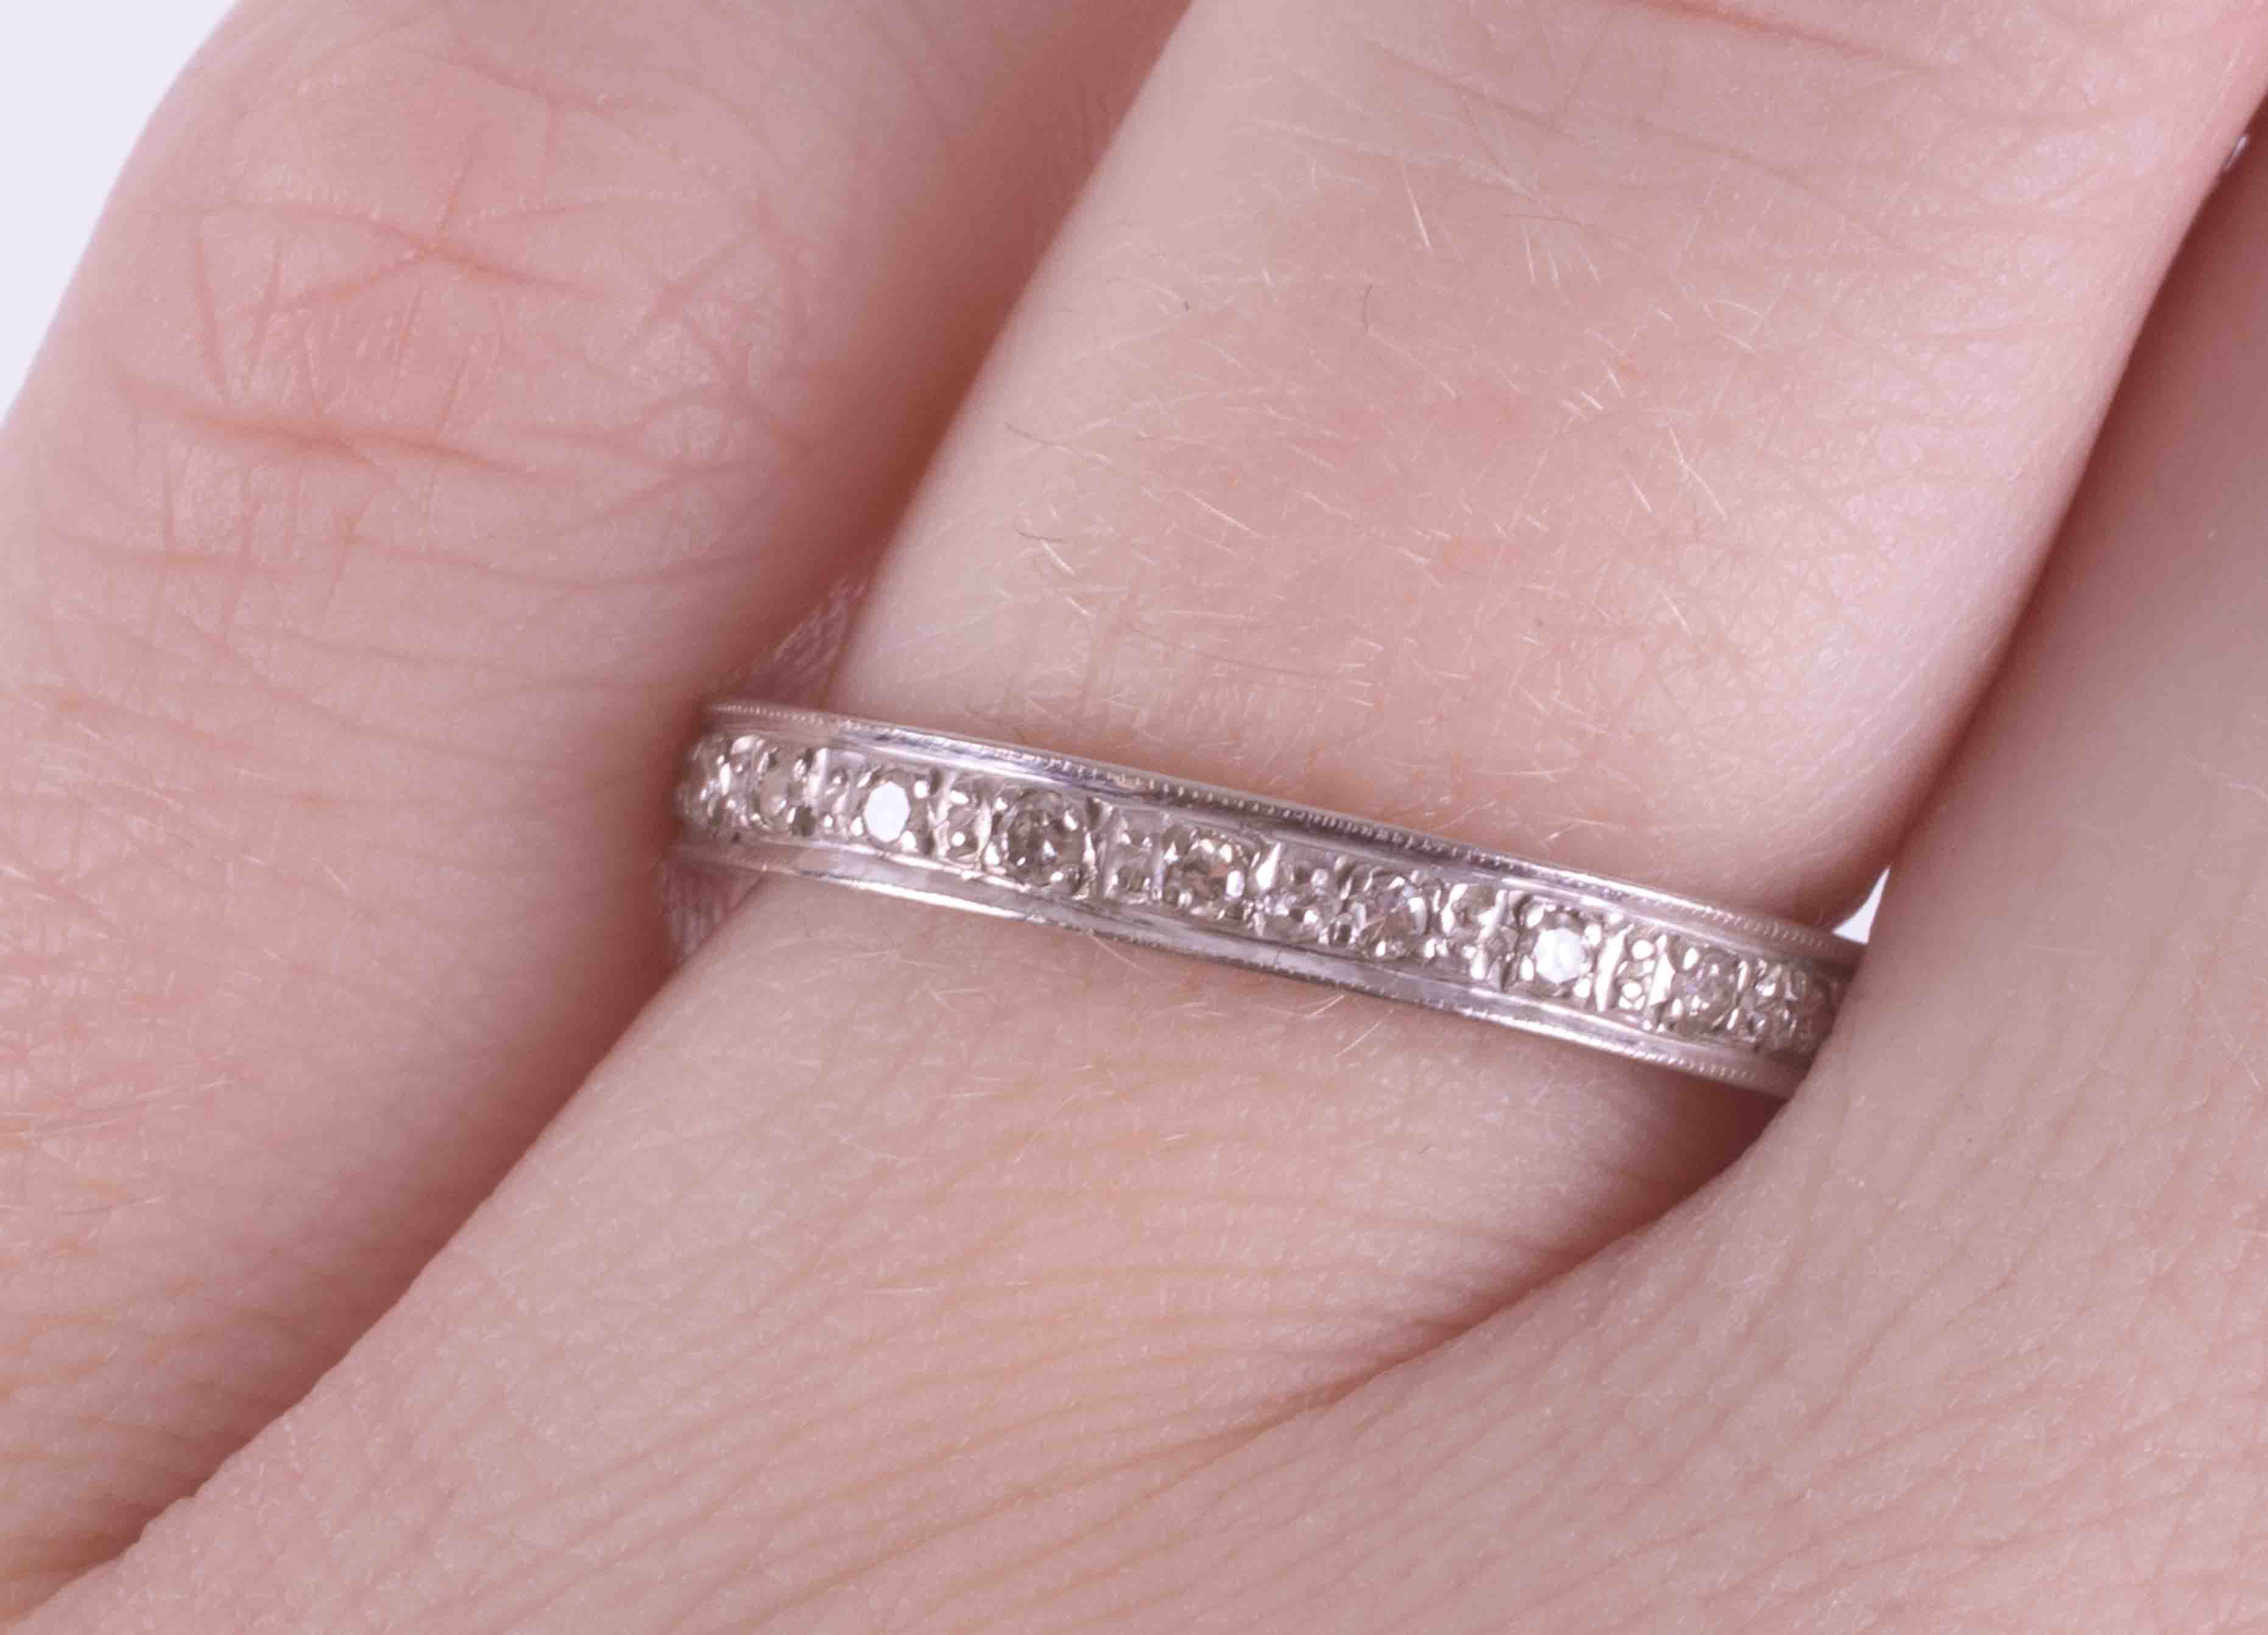 An 18ct white gold full eternity ring set with small old cut diamonds and engraving on the edges, - Image 2 of 2